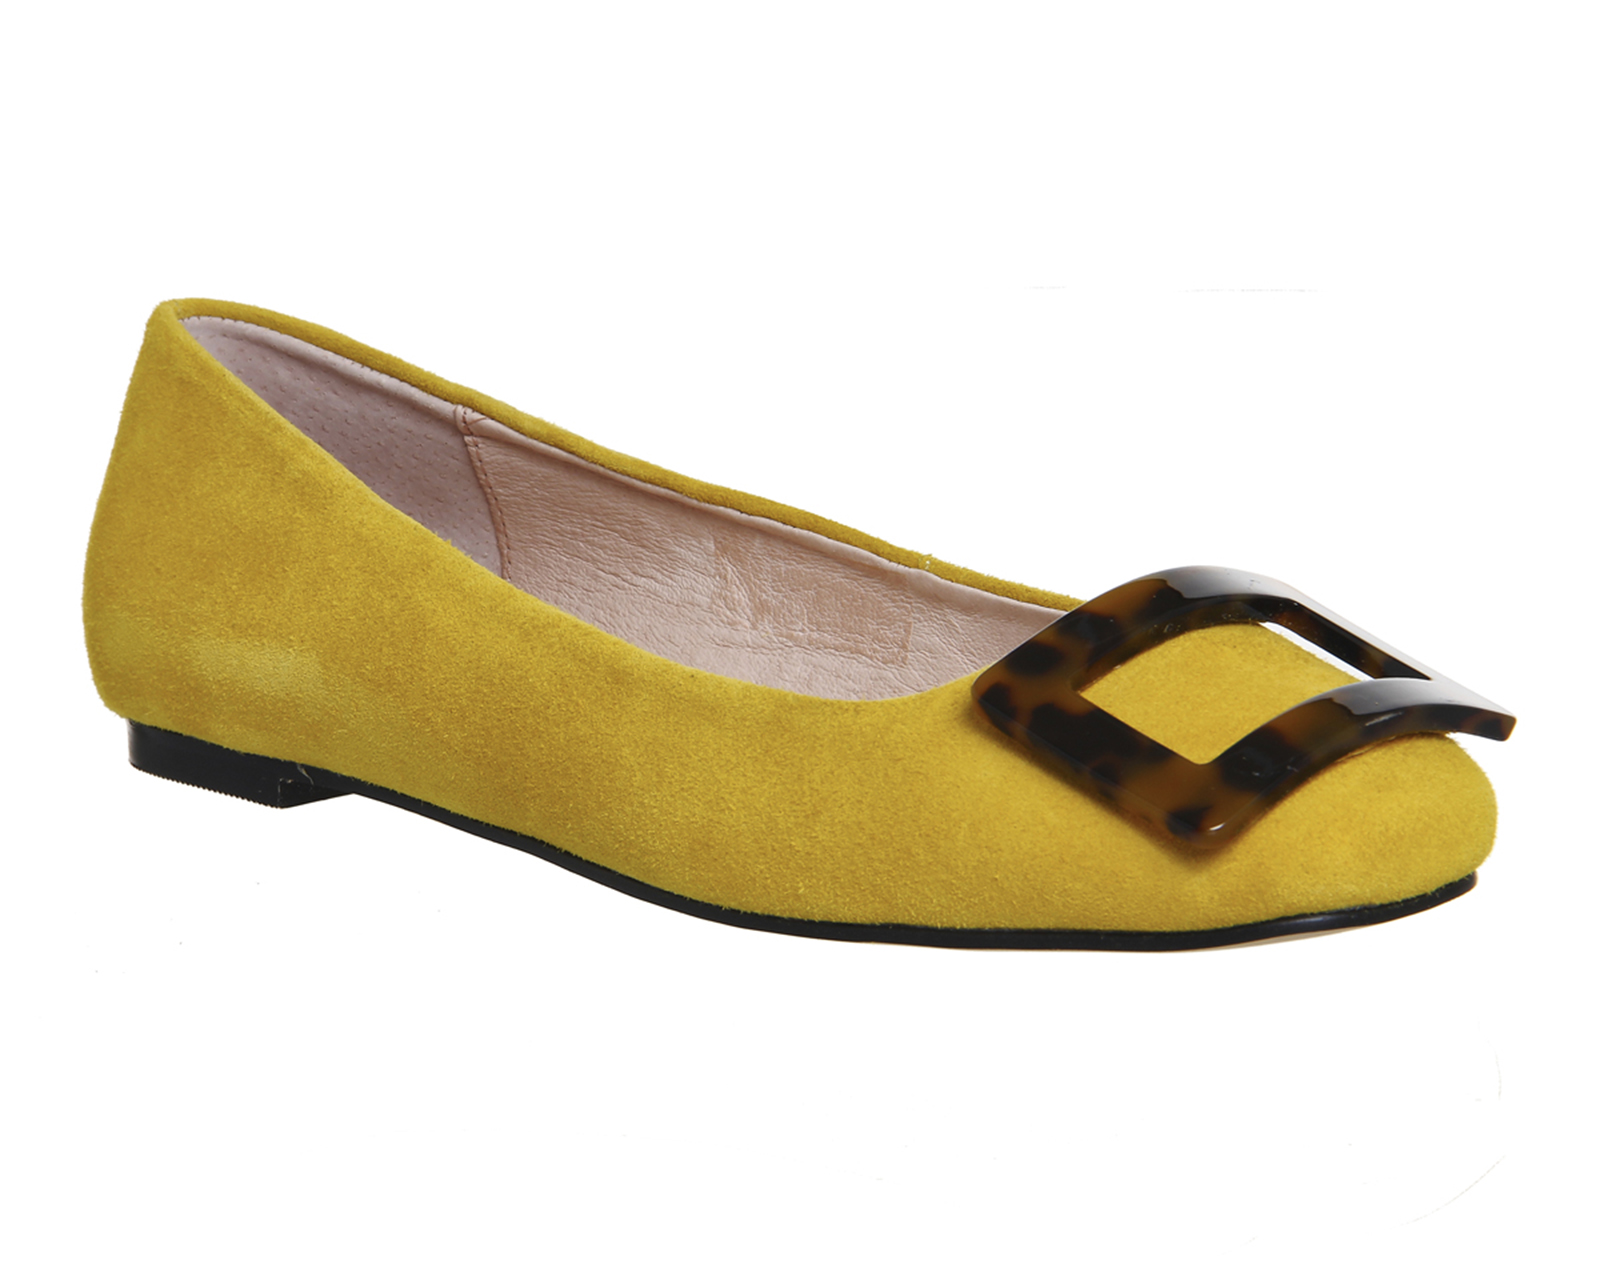 OFFICE Darling Ballet Pumps Mustard Suede - Flat Shoes for Women